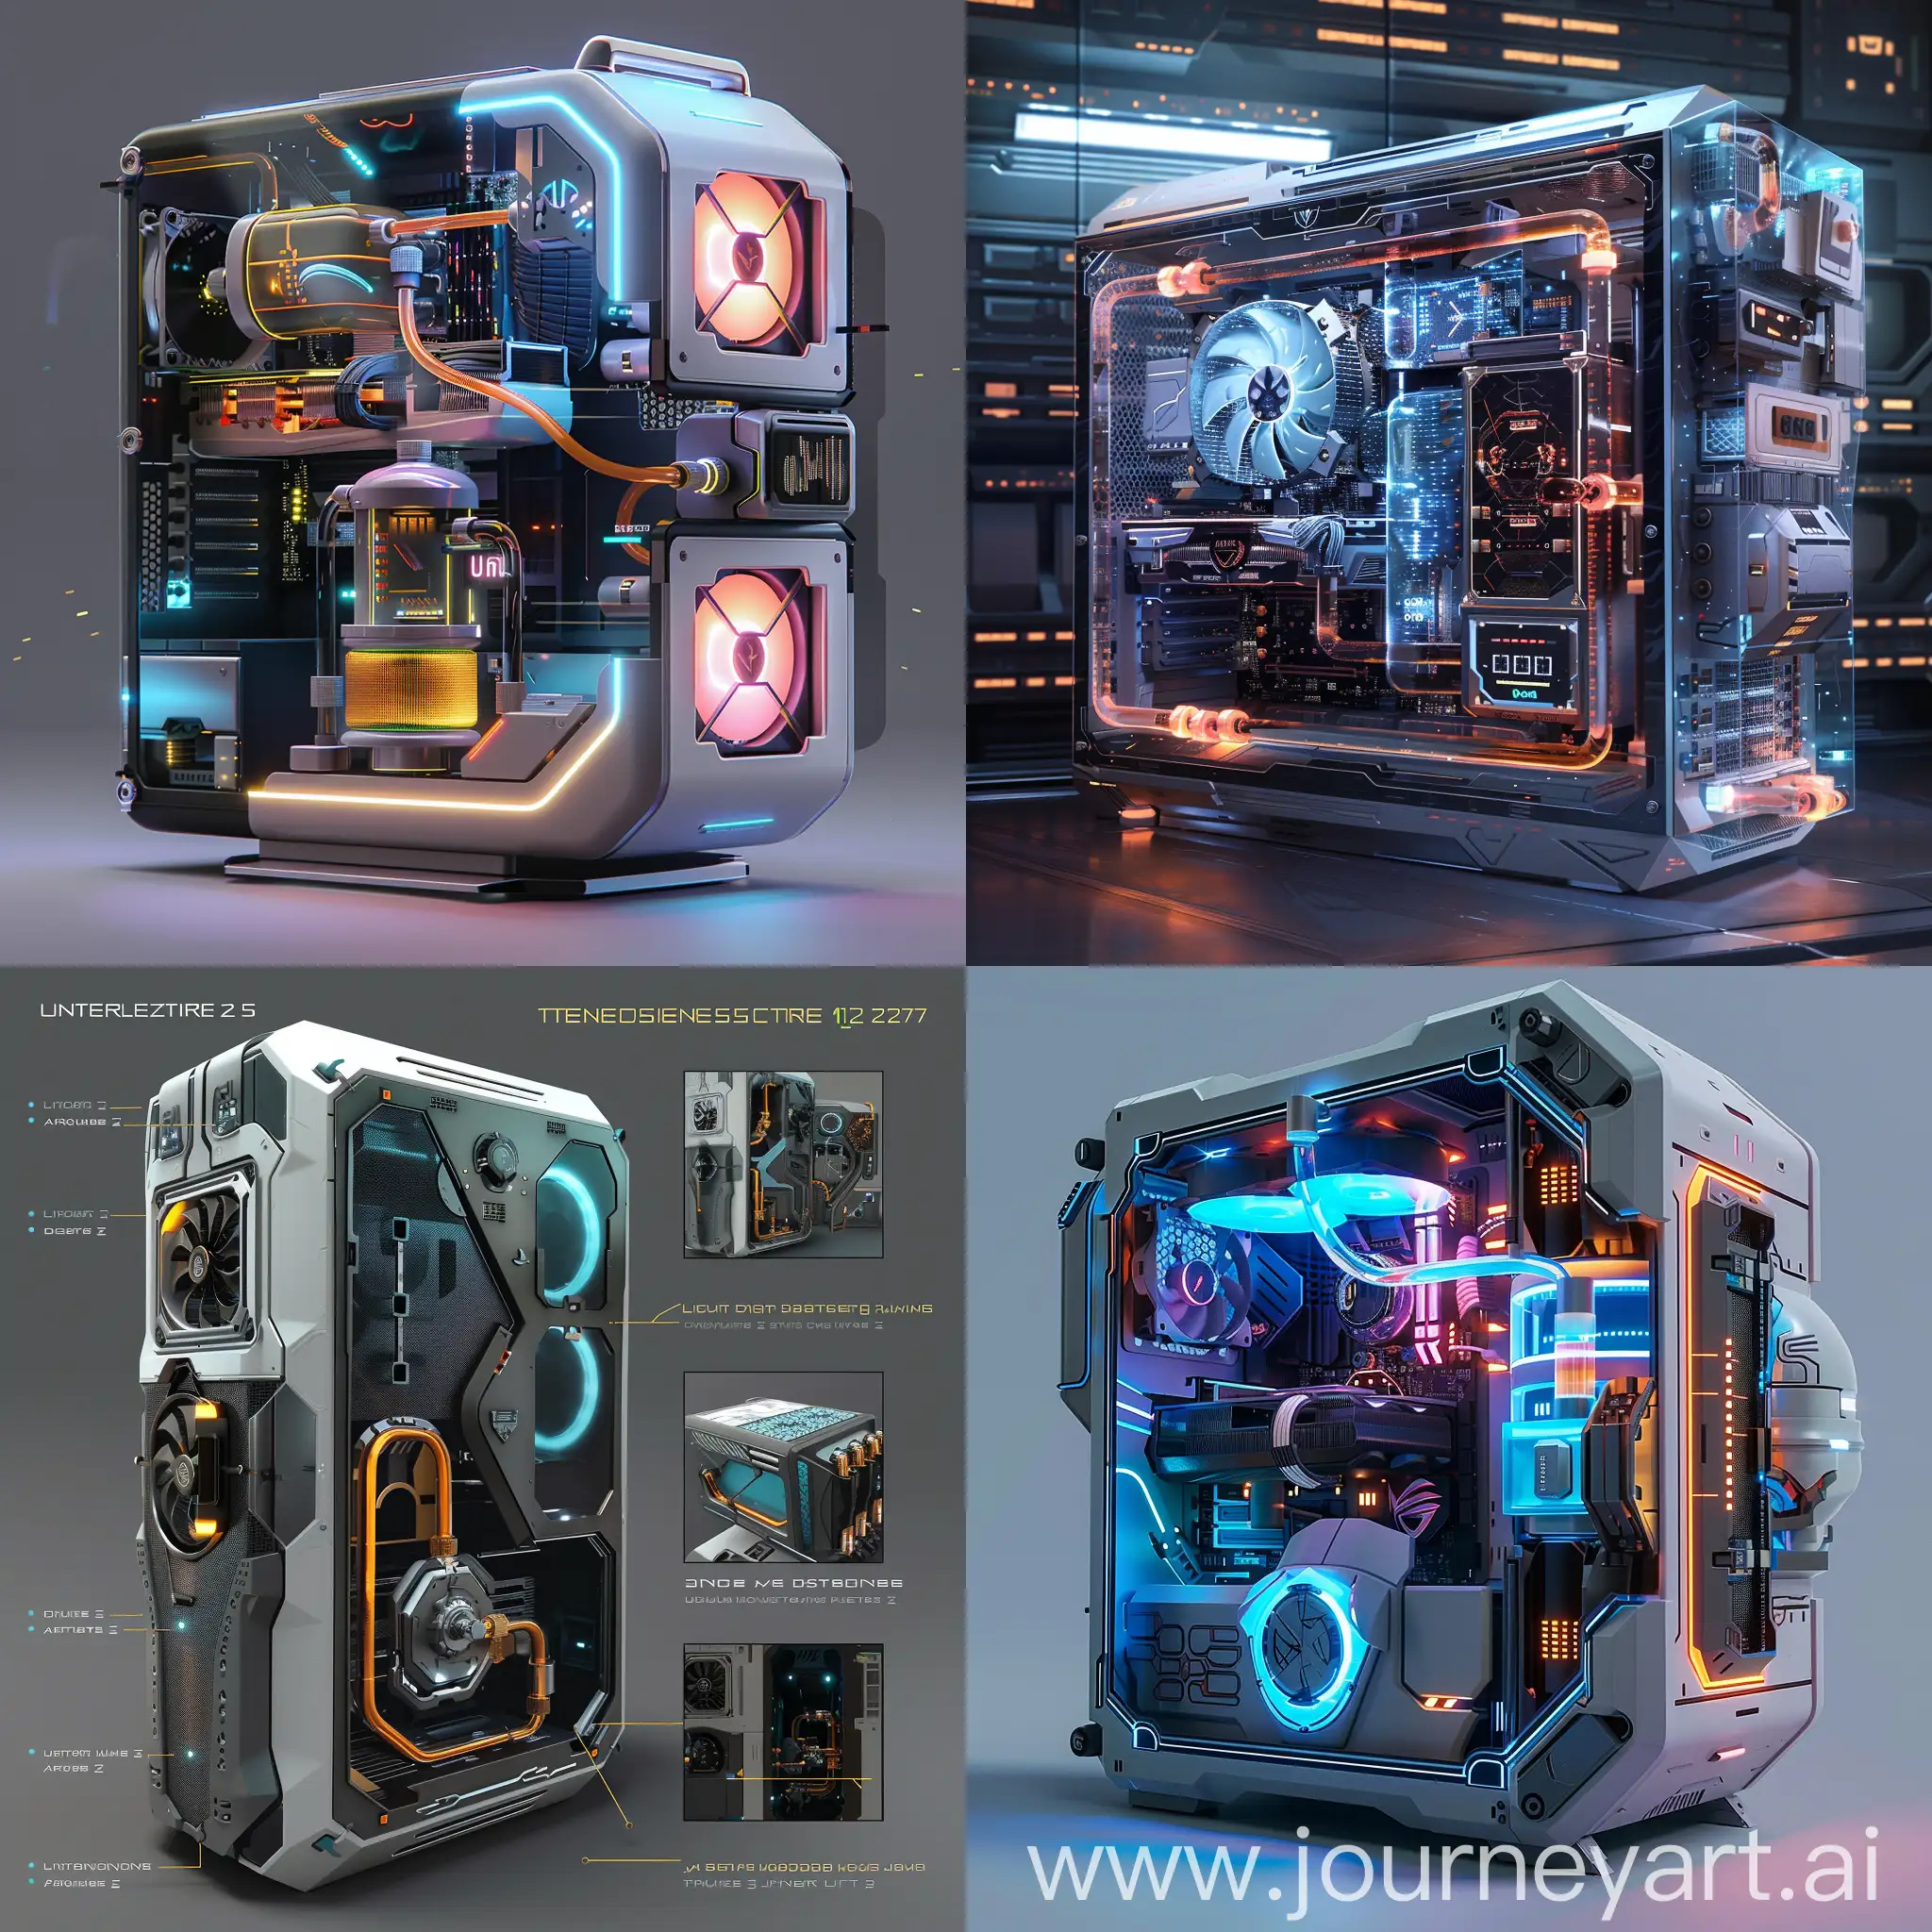 Futuristic PC case, Modular Design (inspired by Lego), Organic Shapes (inspired by Alien), Liquid Cooling Network (inspired by Terminator 2), Transparent Everything (inspired by Star Trek), Holographic Displays (inspired by Mass Effect), Kinetic Sculpture Fans (inspired by Dune), AI-Controlled Maintenance (inspired by The Expanse), Self-Cleaning Design (inspired by WALL-E), Modular Power Supply (inspired by Iron Man), Neomorphic Lighting (inspired by Cyberpunk 2077), Kinetic Mesh Panels (inspired by Bladerunner), Nanotech Finish (inspired by A Fire Upon the Deep), Modular Aesthetics (inspired by Transformers), Weaponized Design (inspired by Halo), Augmented Reality Interface (inspired by Ghost in the Shell), Living Metal Construction (inspired by Terminator 2), Space Station Inspiration (inspired by 2001: A Space Odyssey), Retro-Futuristic Design (inspired by Fallout), Bio-Organic Design (inspired by Avatar), Hidden Functionality (inspired by Star Wars), unreal engine 5 --stylize 1000